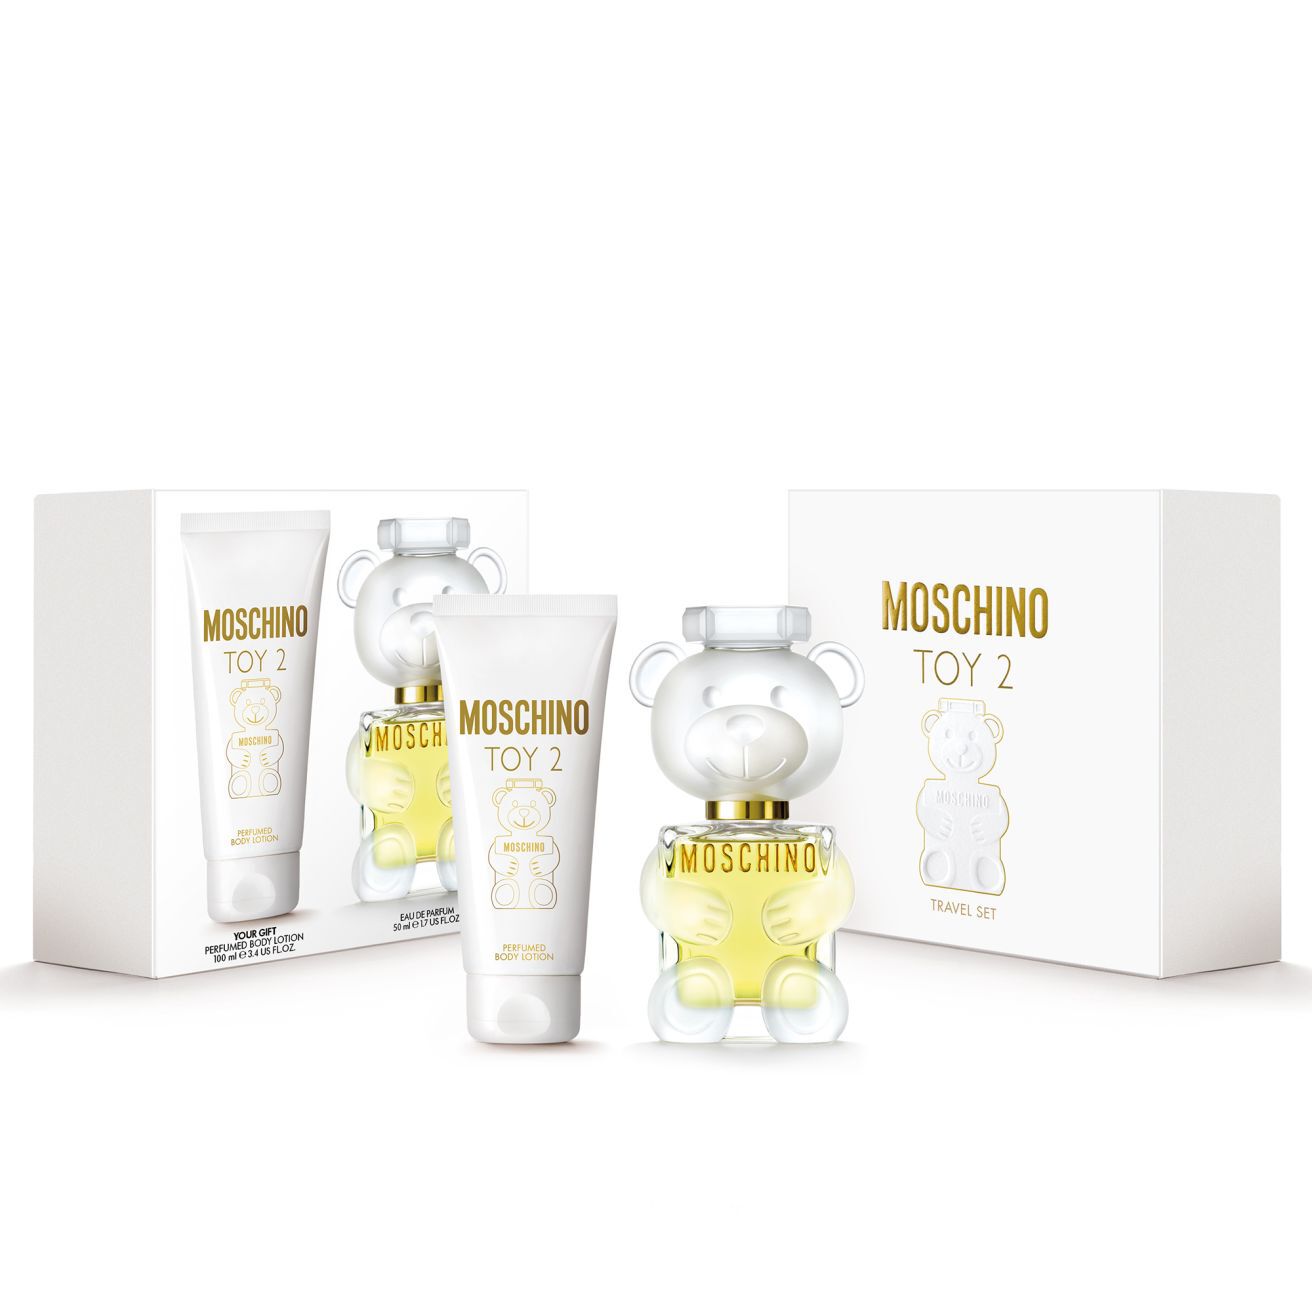 Moschino Toy 2 Gift Fragrance | Heathrow Reserve & Collect